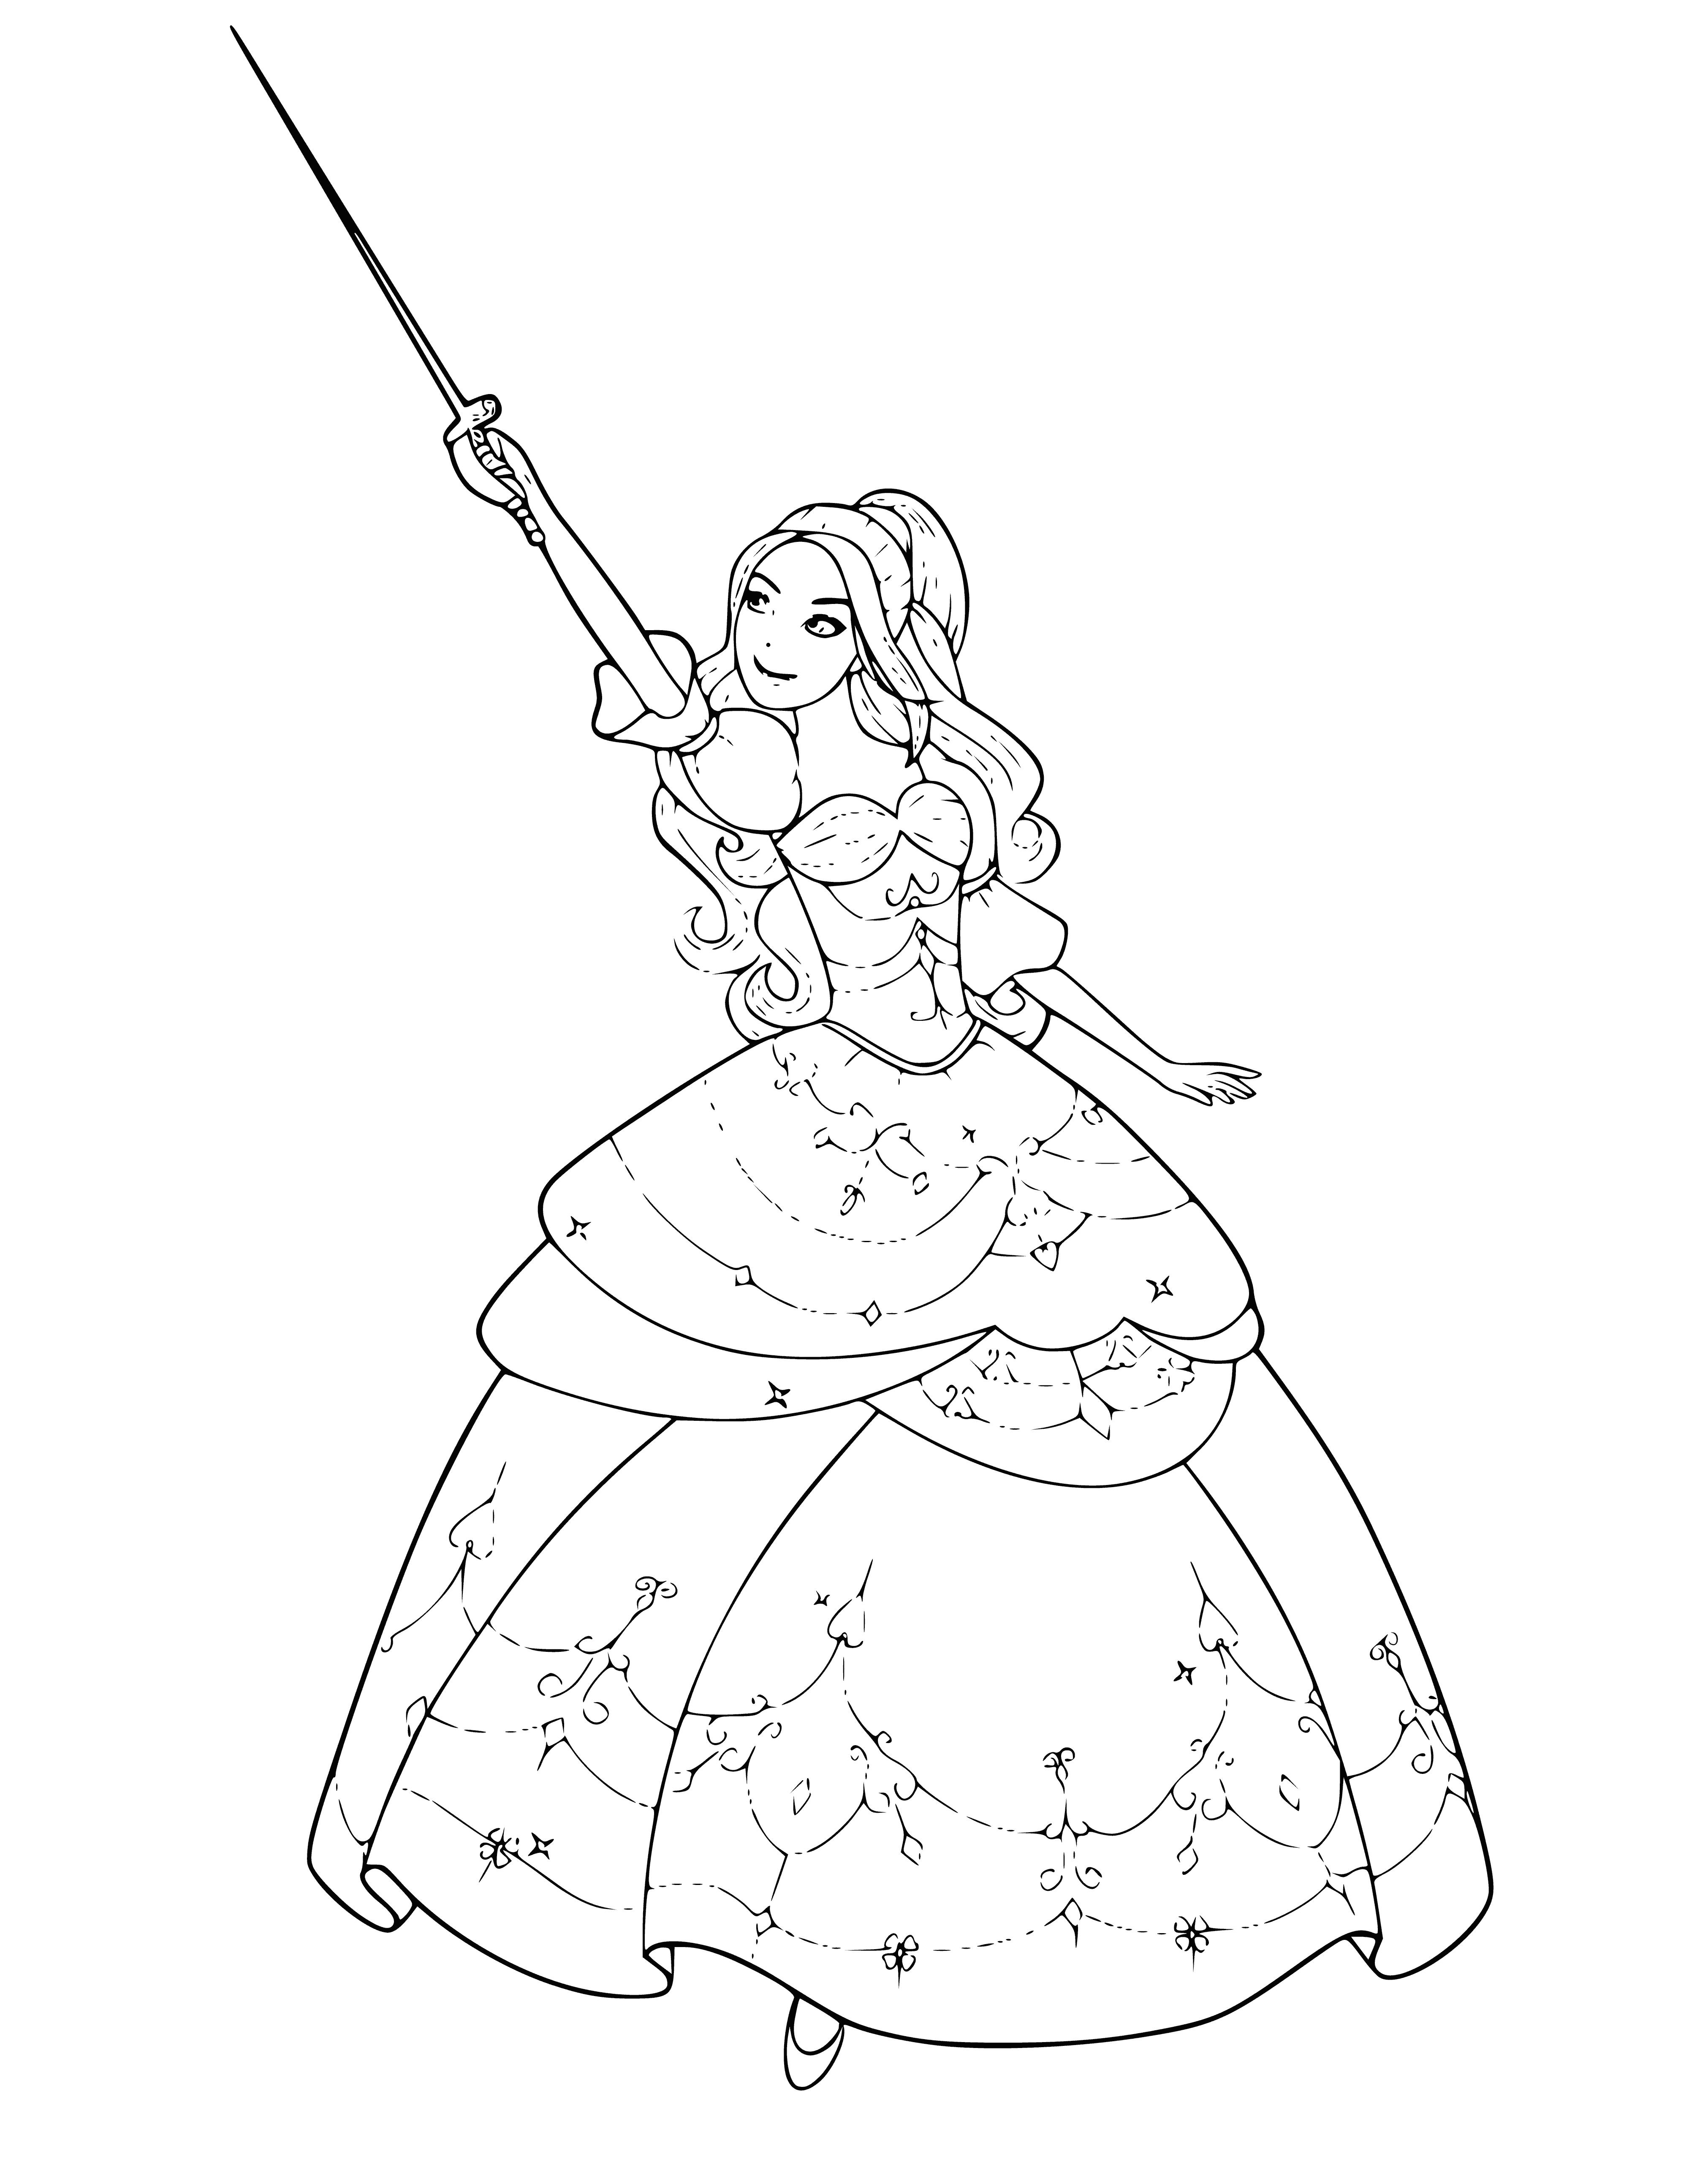 coloring page: Barbie is rocking a musketeer outfit with a sword, black hat, gold accents, and a ponytail.